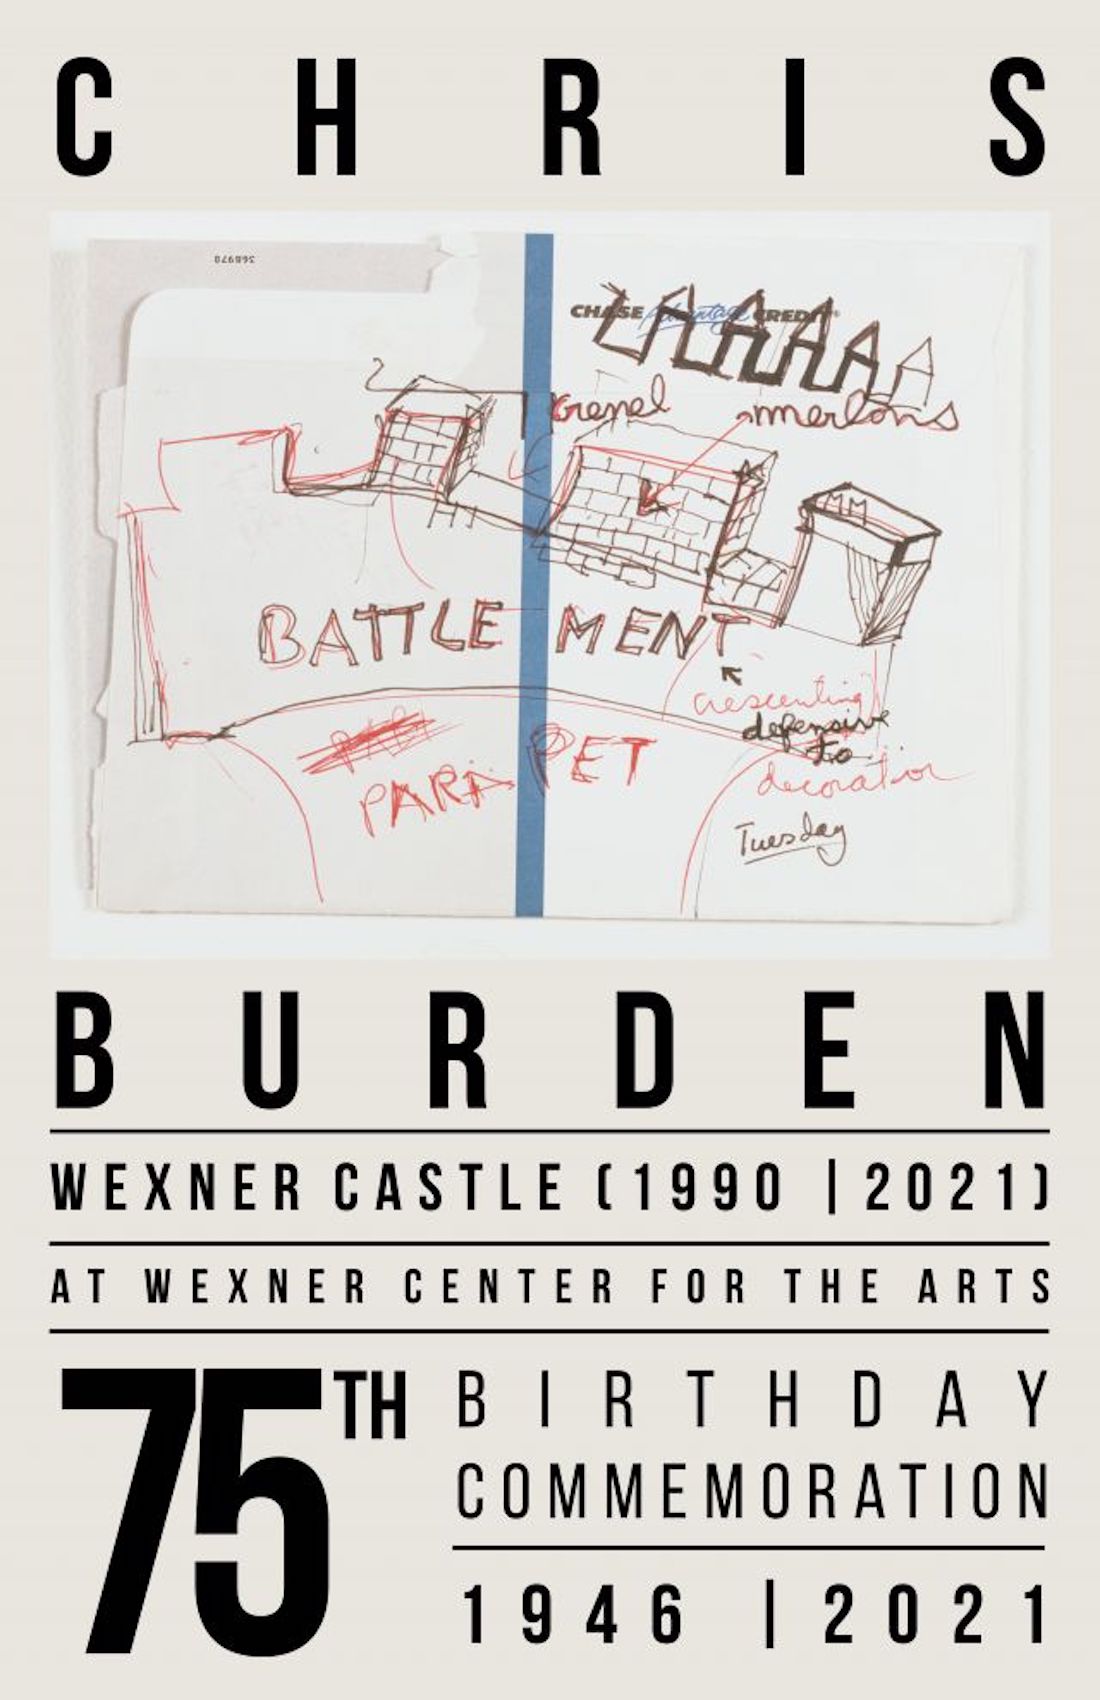 Erica Mercado-designed poster to commemorate the 75th birthday of Chris Burden, featuring one of Burden's drawings of Wexner Castle at the center of the design